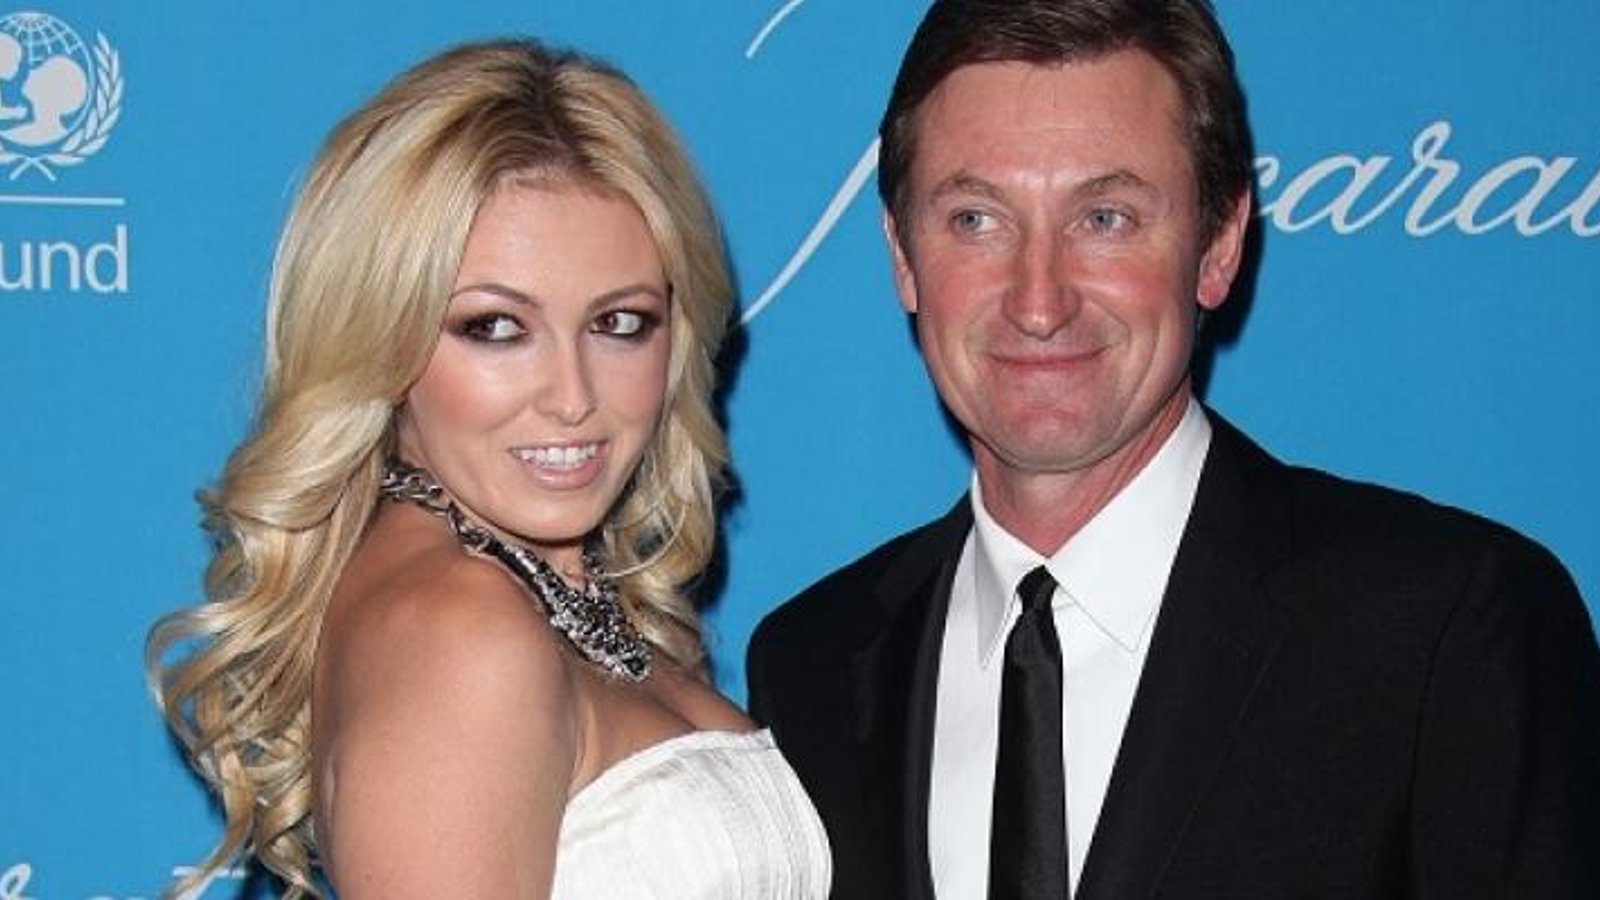 Paulina Gretzky shows off her body 5 months after giving birth.